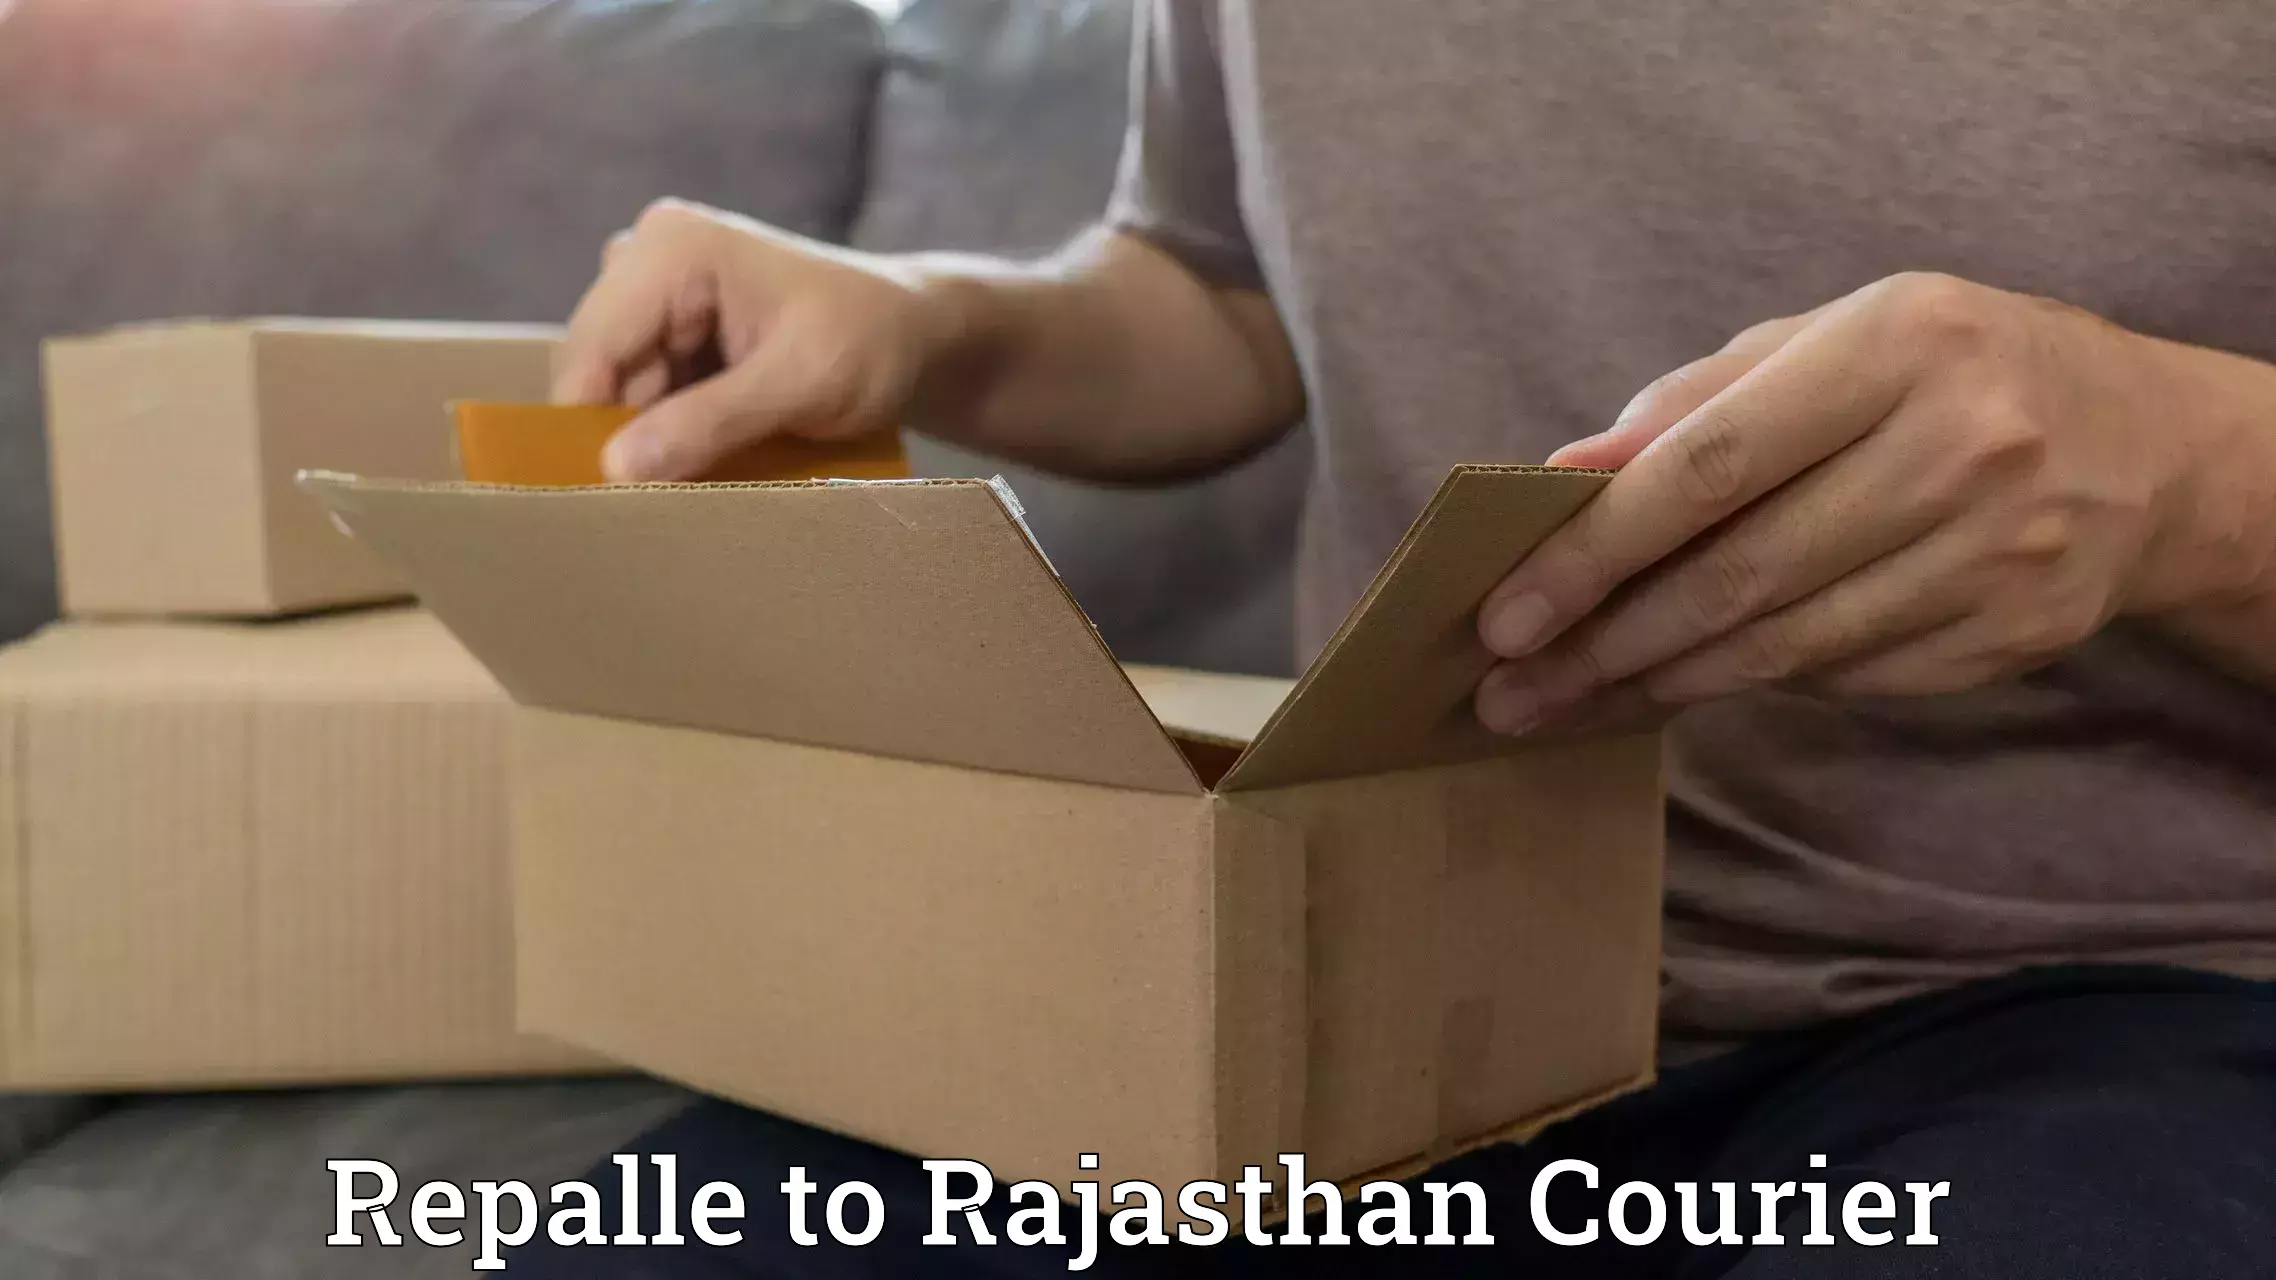 Courier tracking online Repalle to Rajasthan